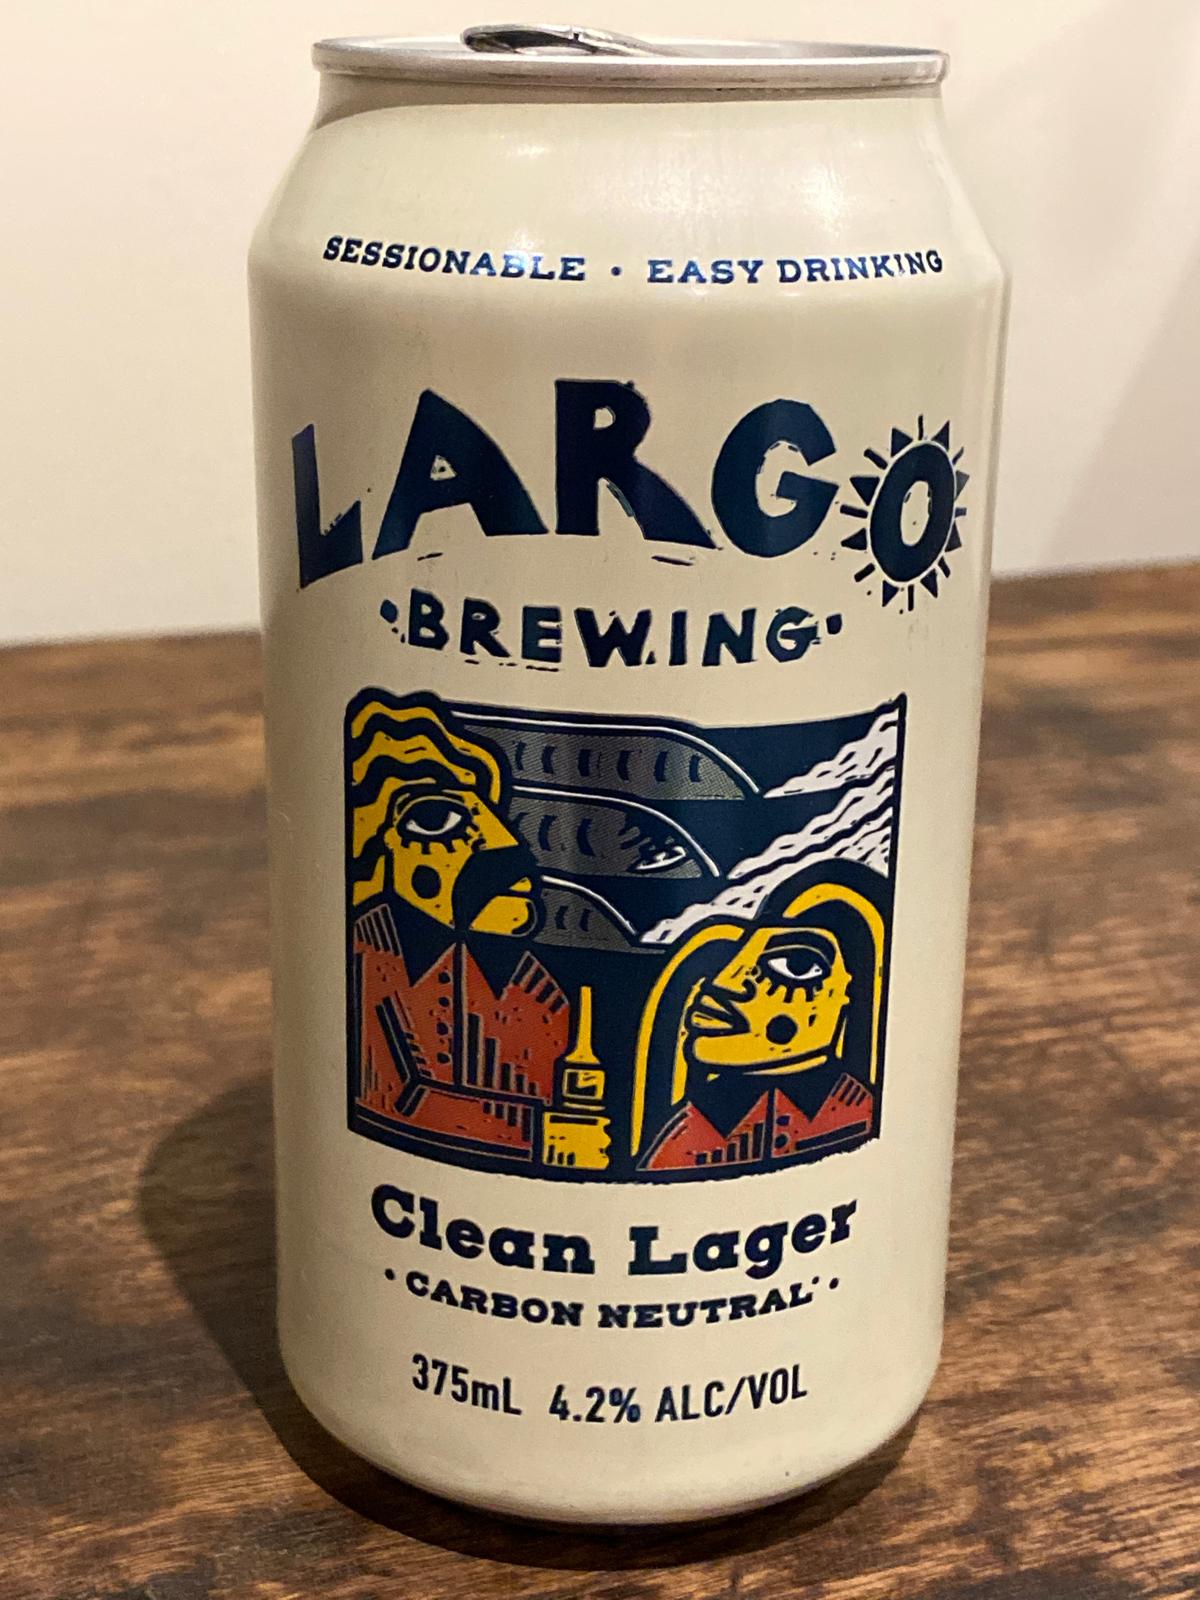 Clean Lager